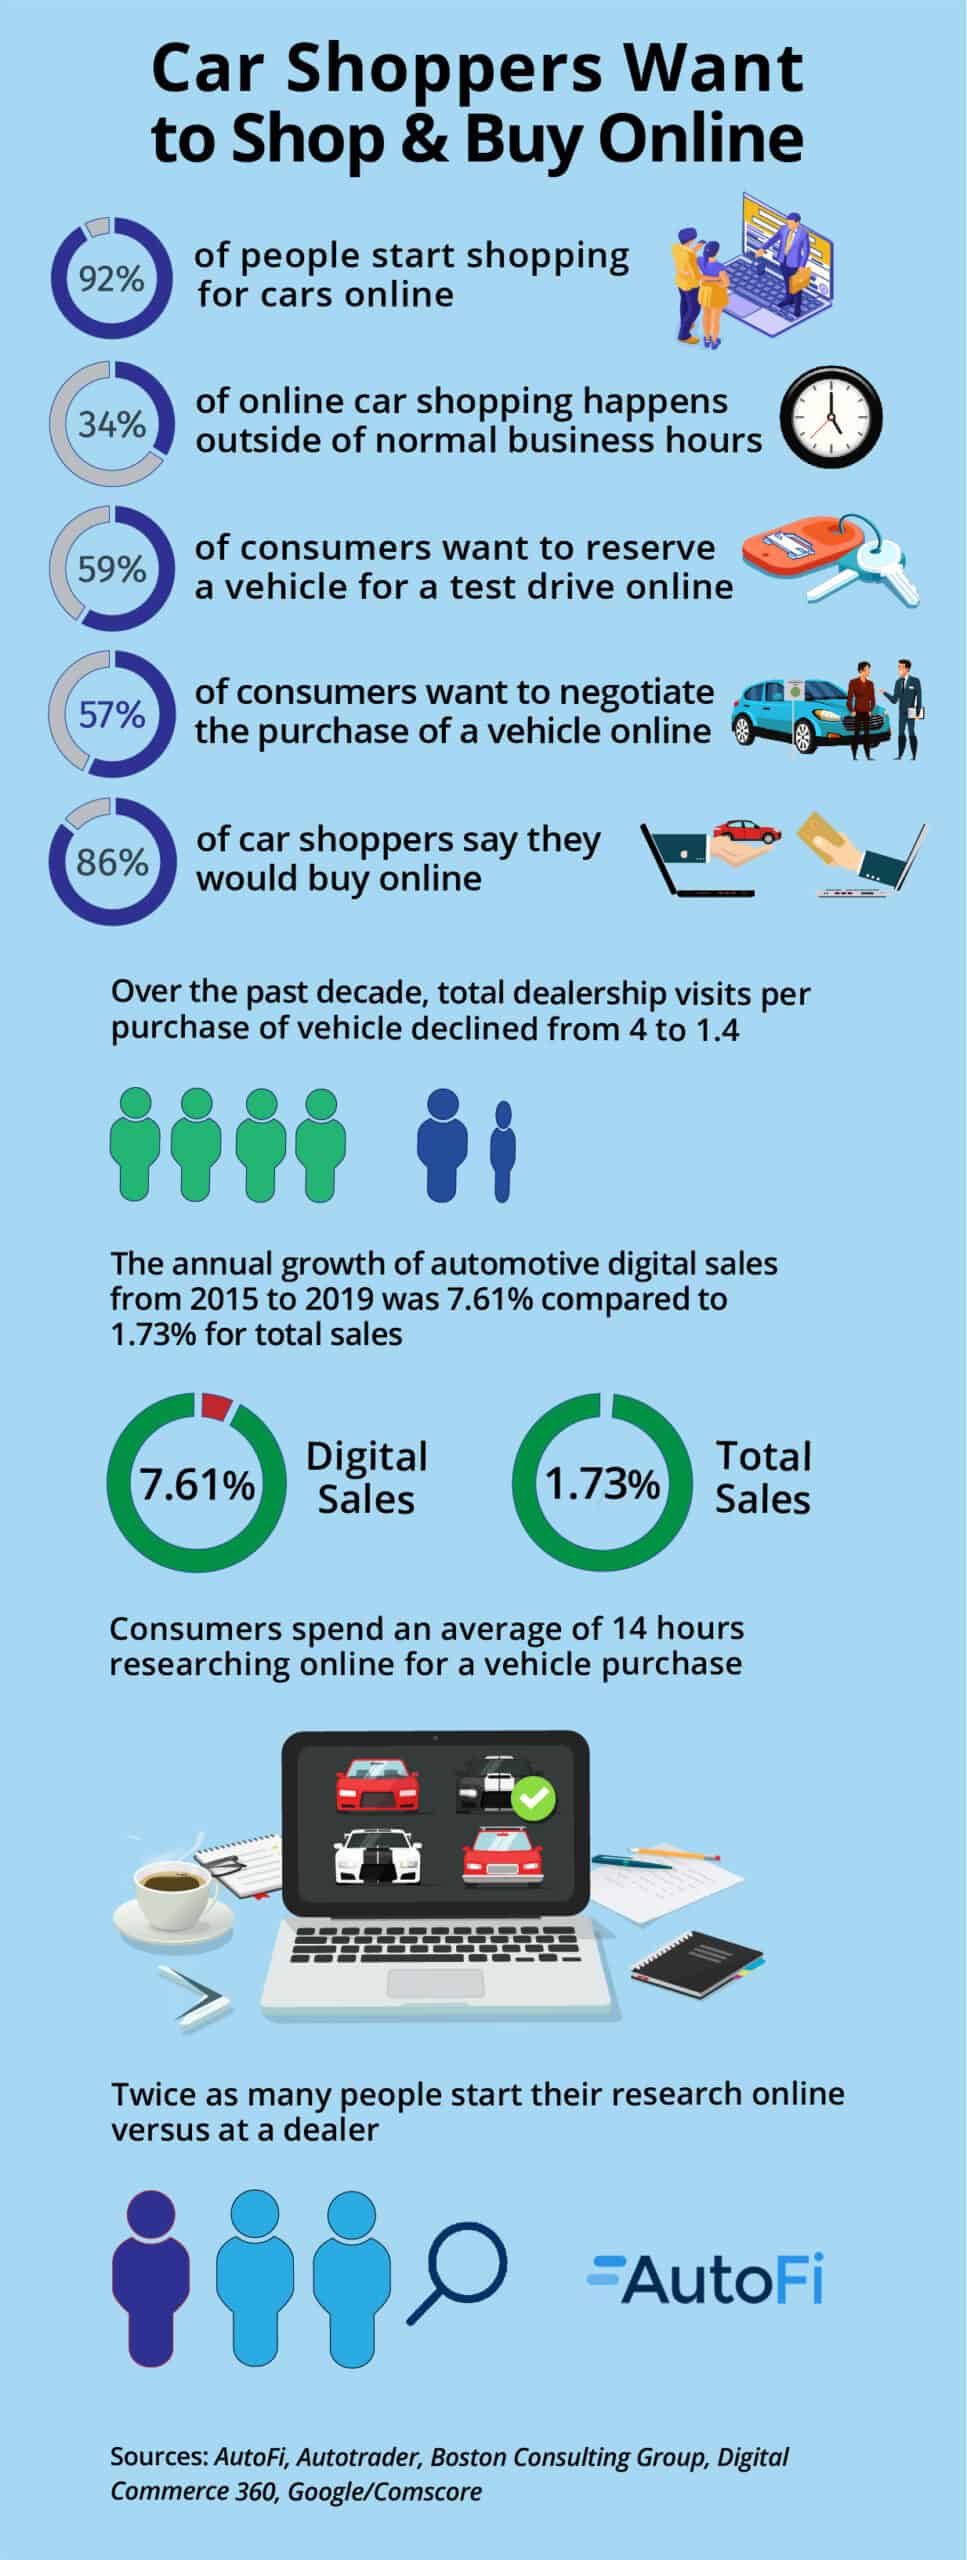 Car shoppers want to shop and buy online